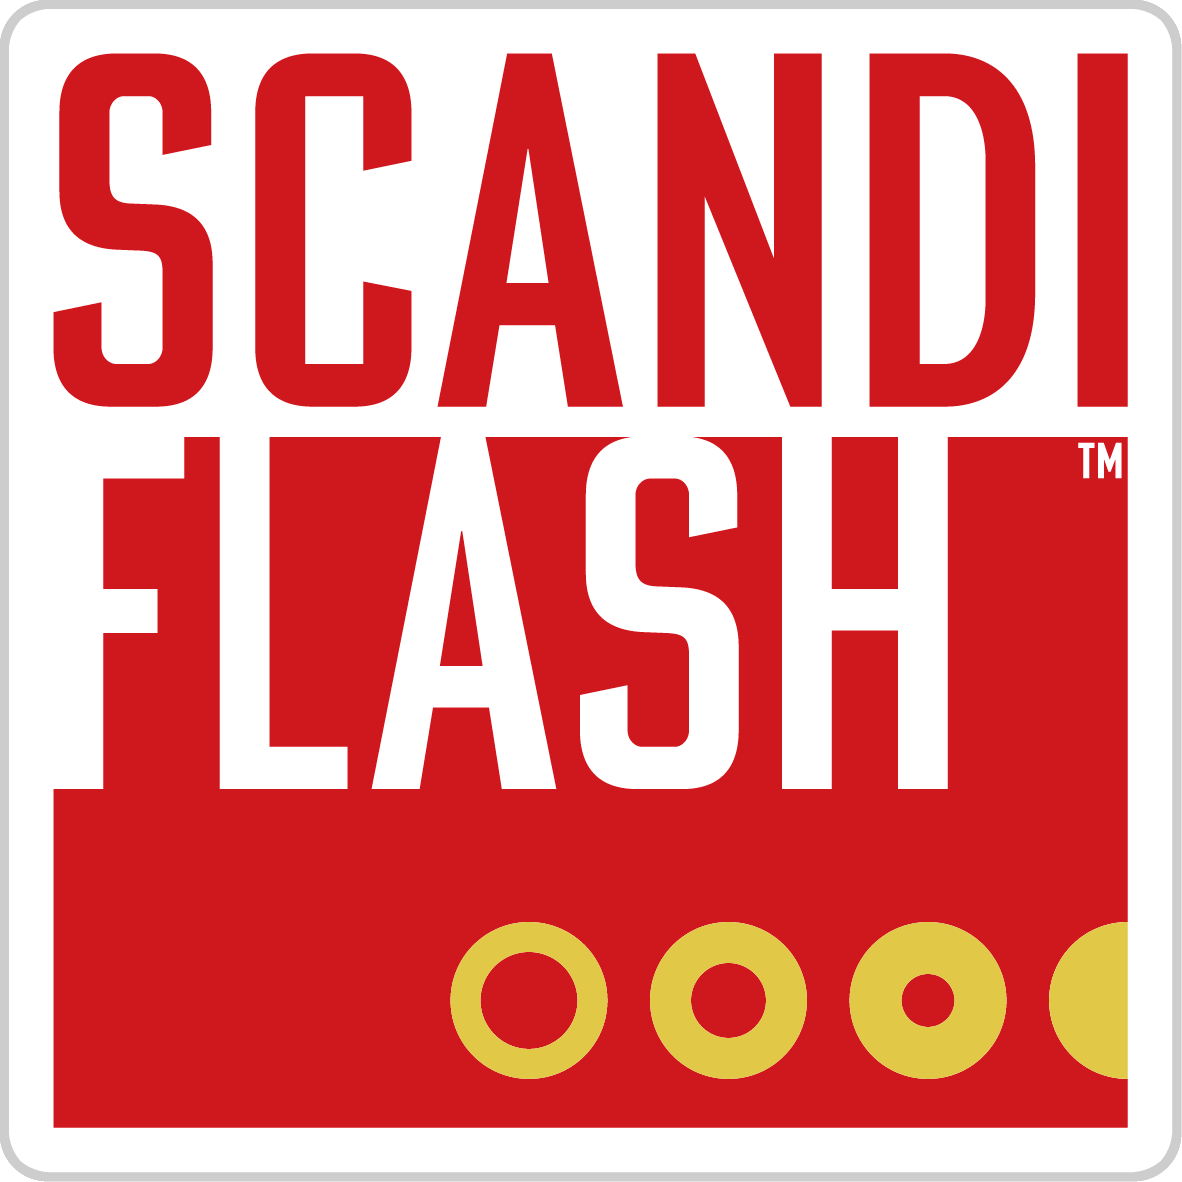 Scandiflash logo stacked and stroked.